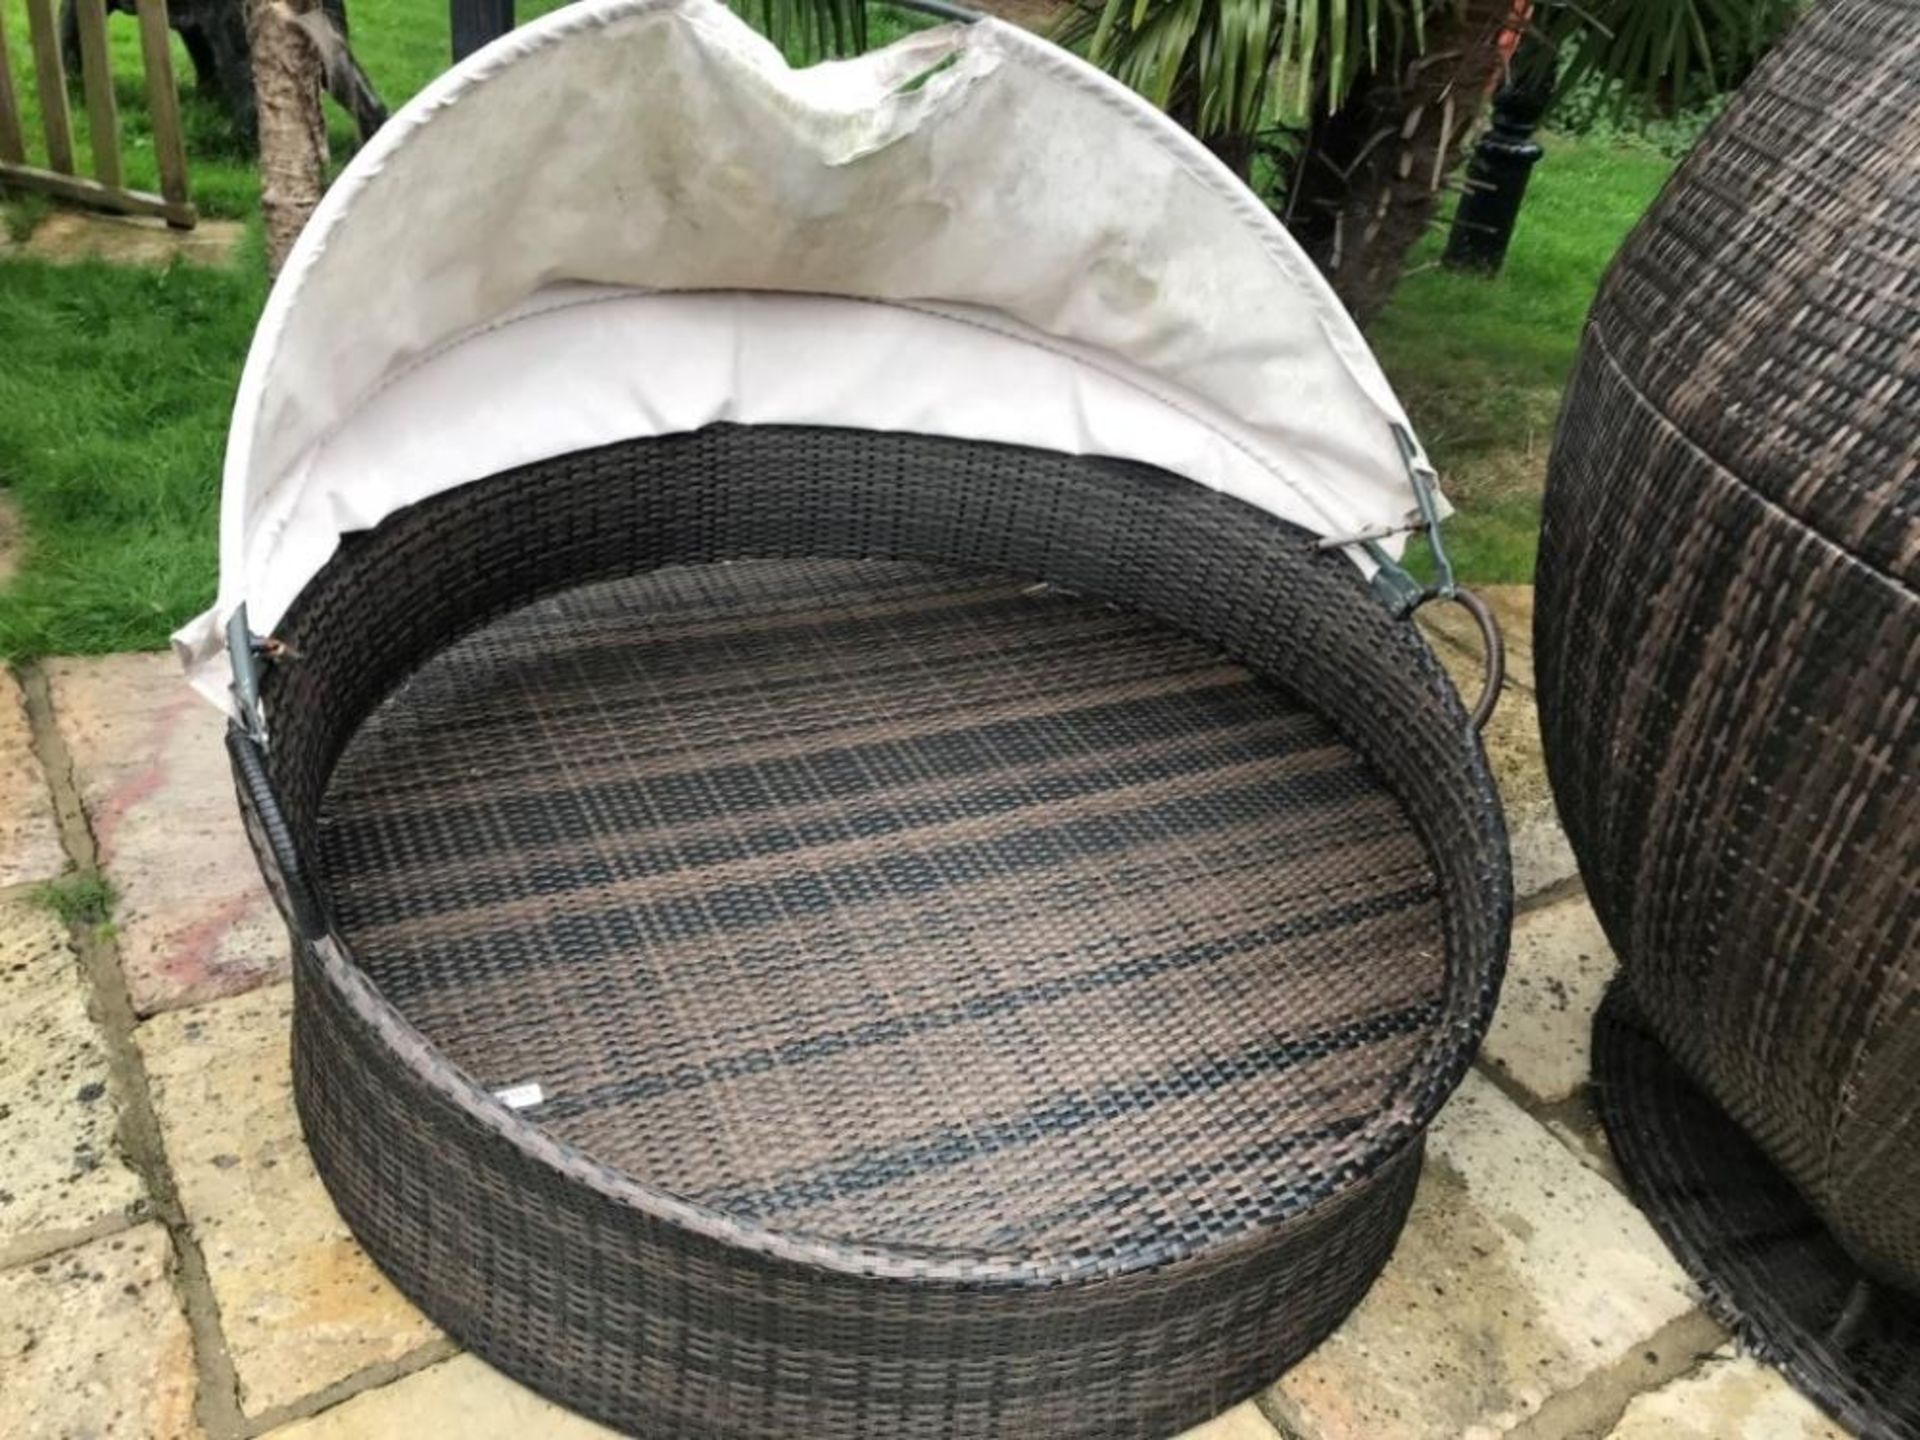 1 x Wicker / Rattan Round Daybed With Fabric Sun Hood - Ref: JB165 - Pre-Owned - NO VAT ON THE - Image 7 of 7